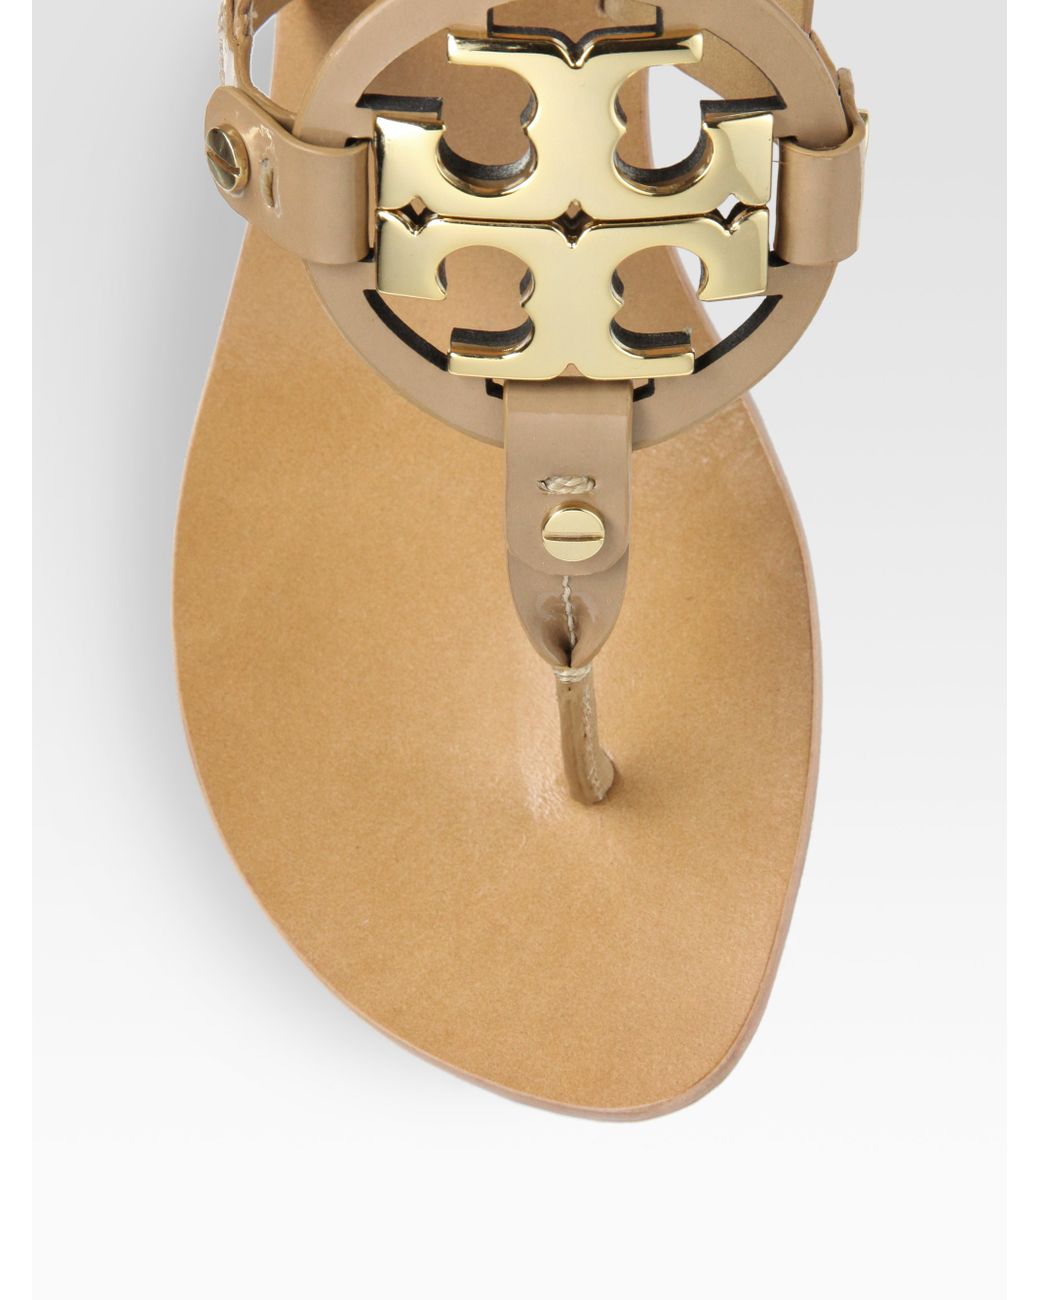 Tory Burch Holly 2 Kitten Heel Logo Patent Thong Sandals in Natural | Lyst